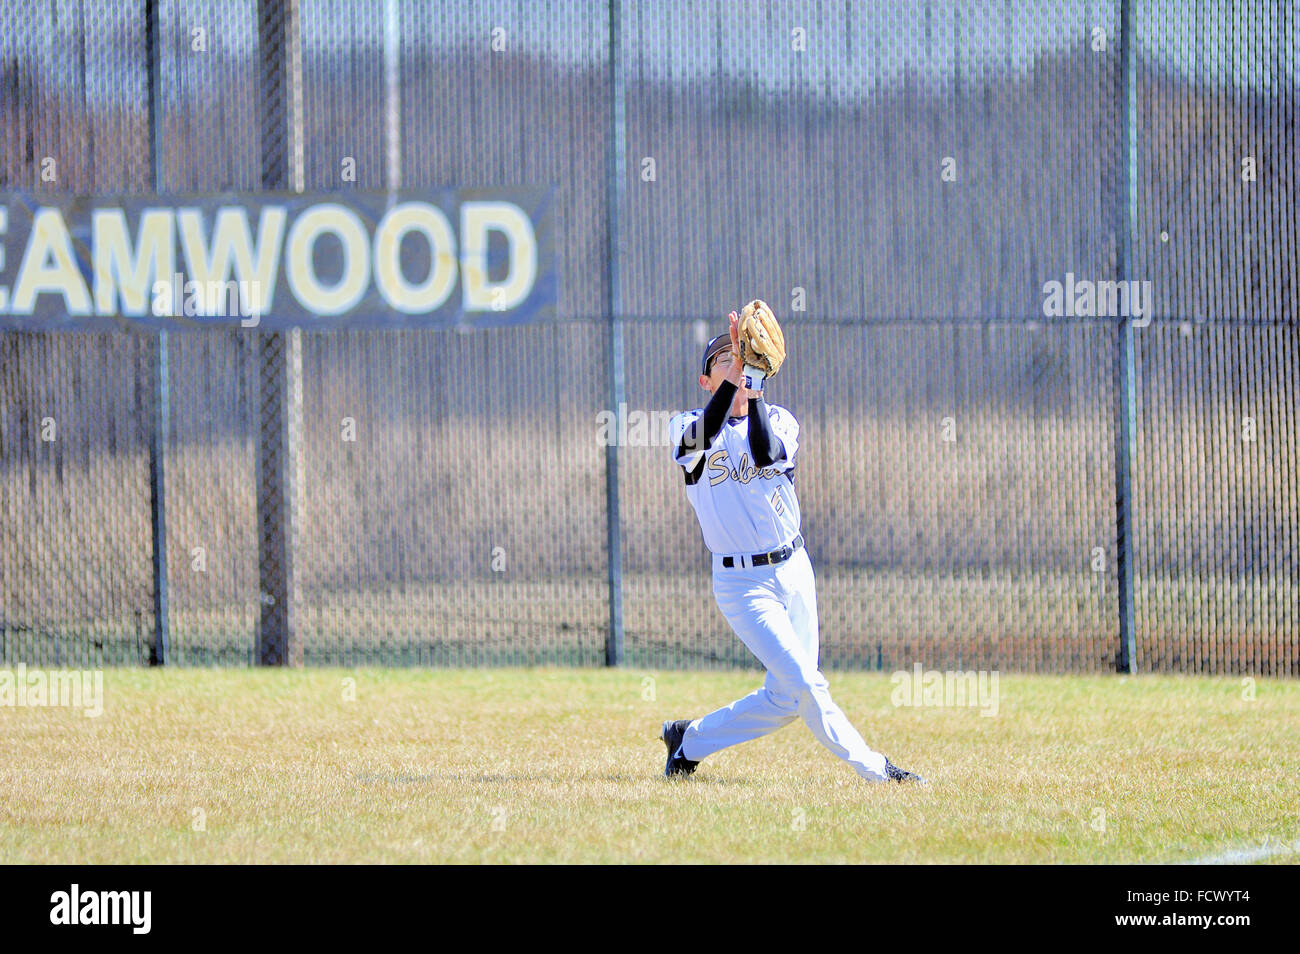 Right fielder making a running catch near the foul line during a high school baseball game. USA. Stock Photo